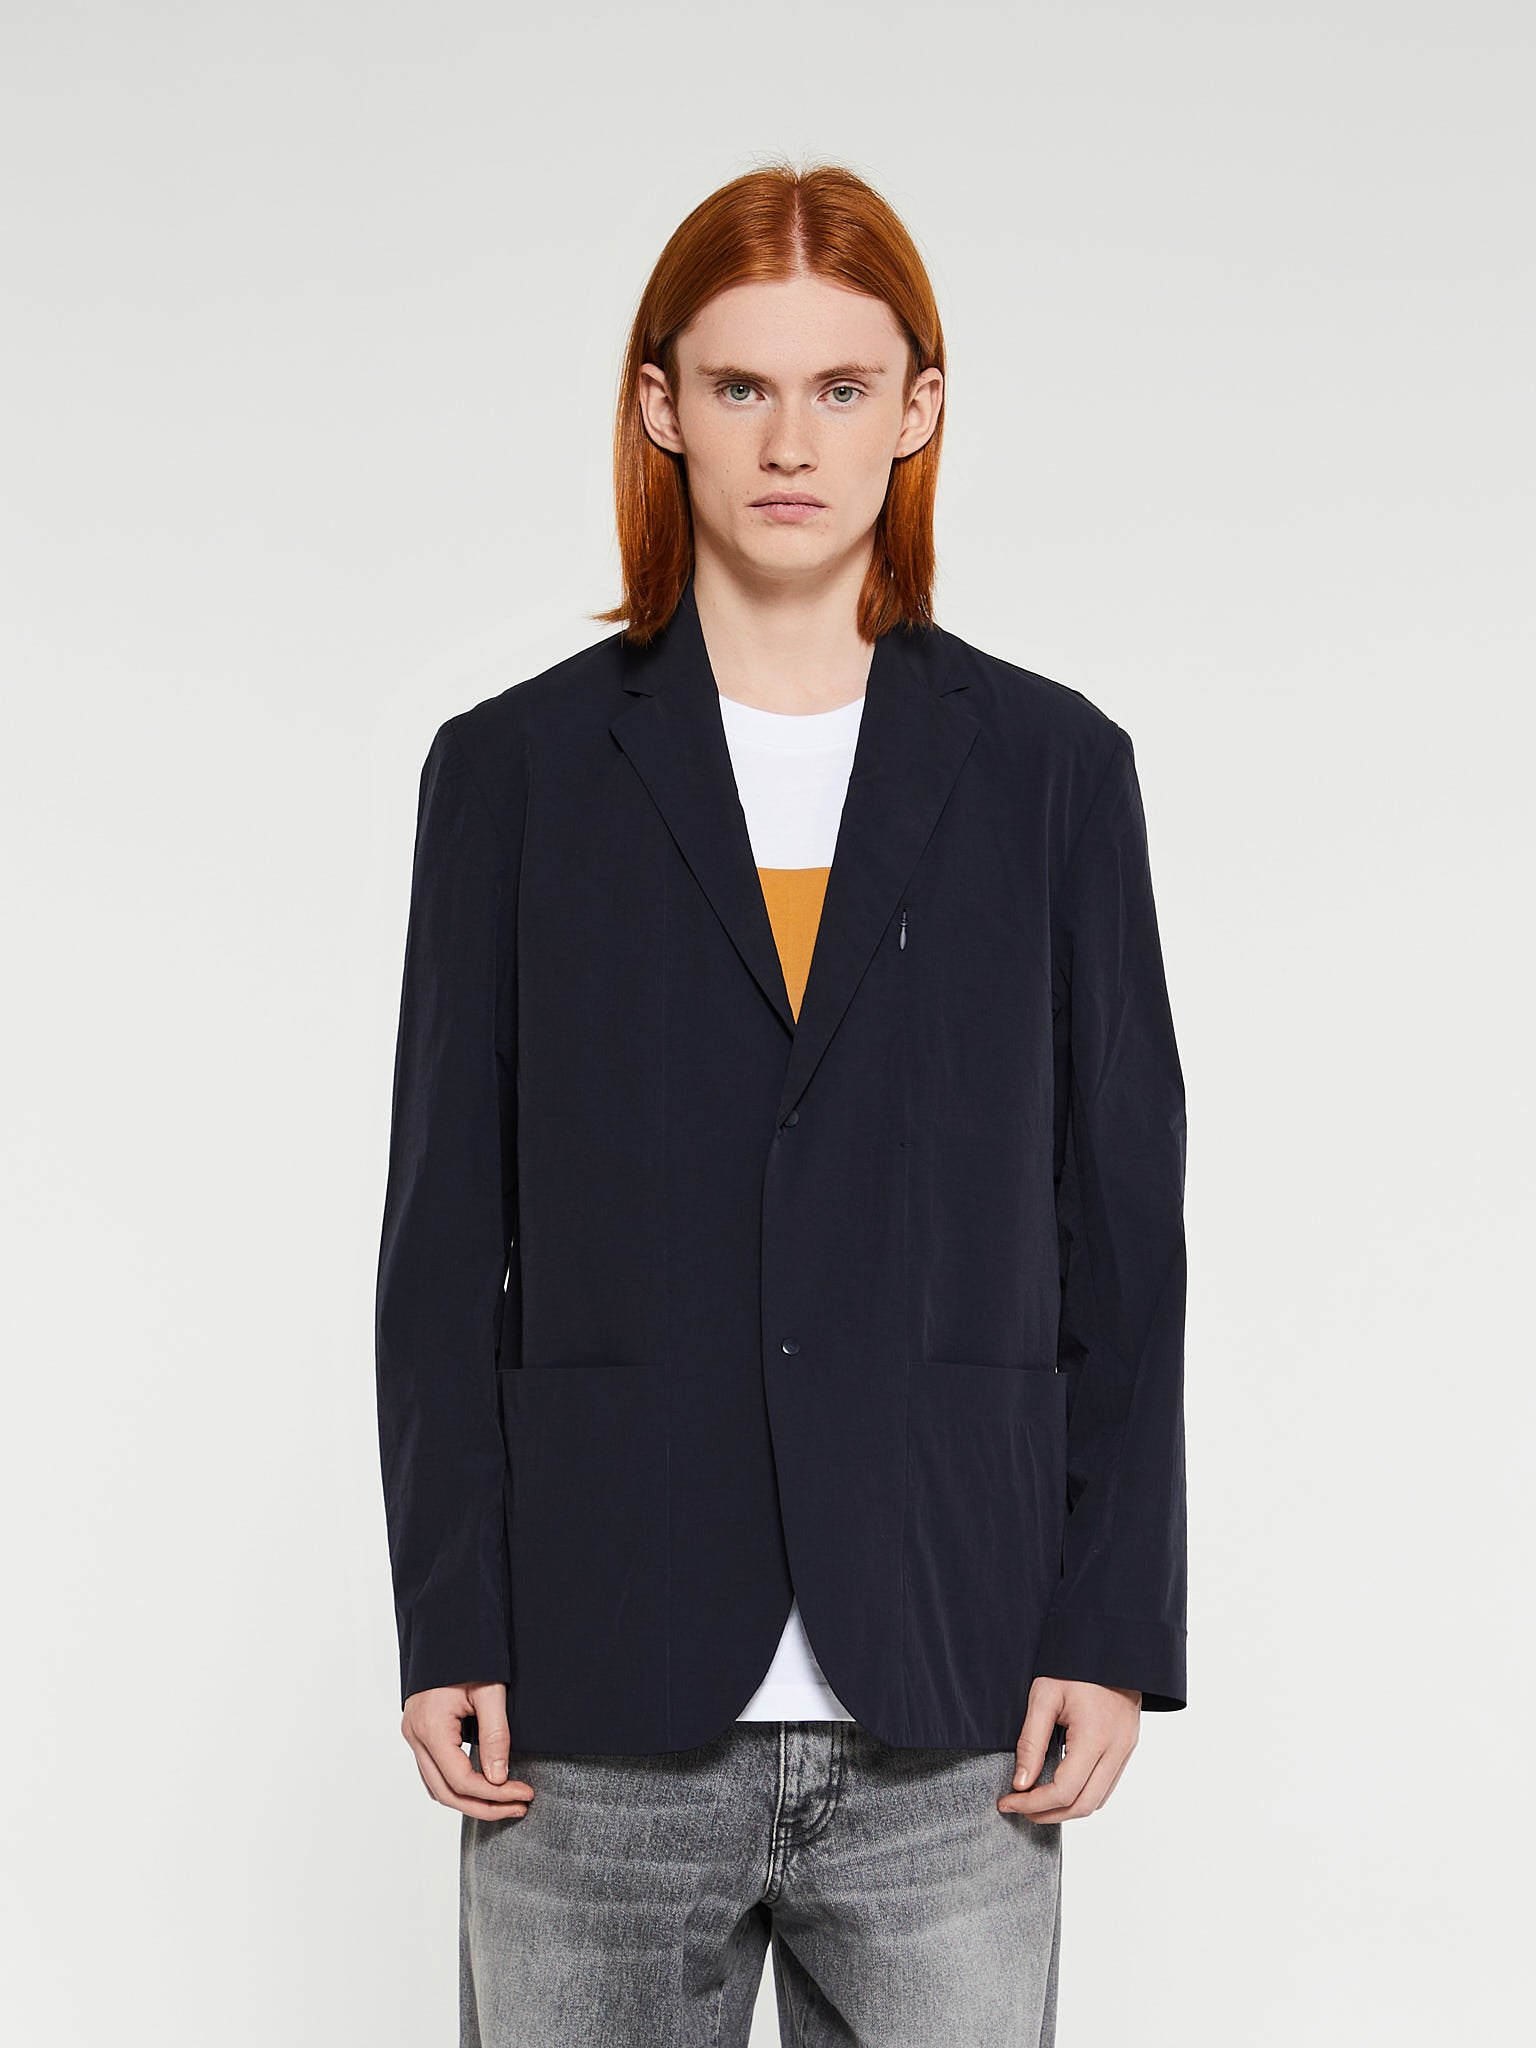 Norse Projects - Emil Travel Light Jacket in Dark Navy